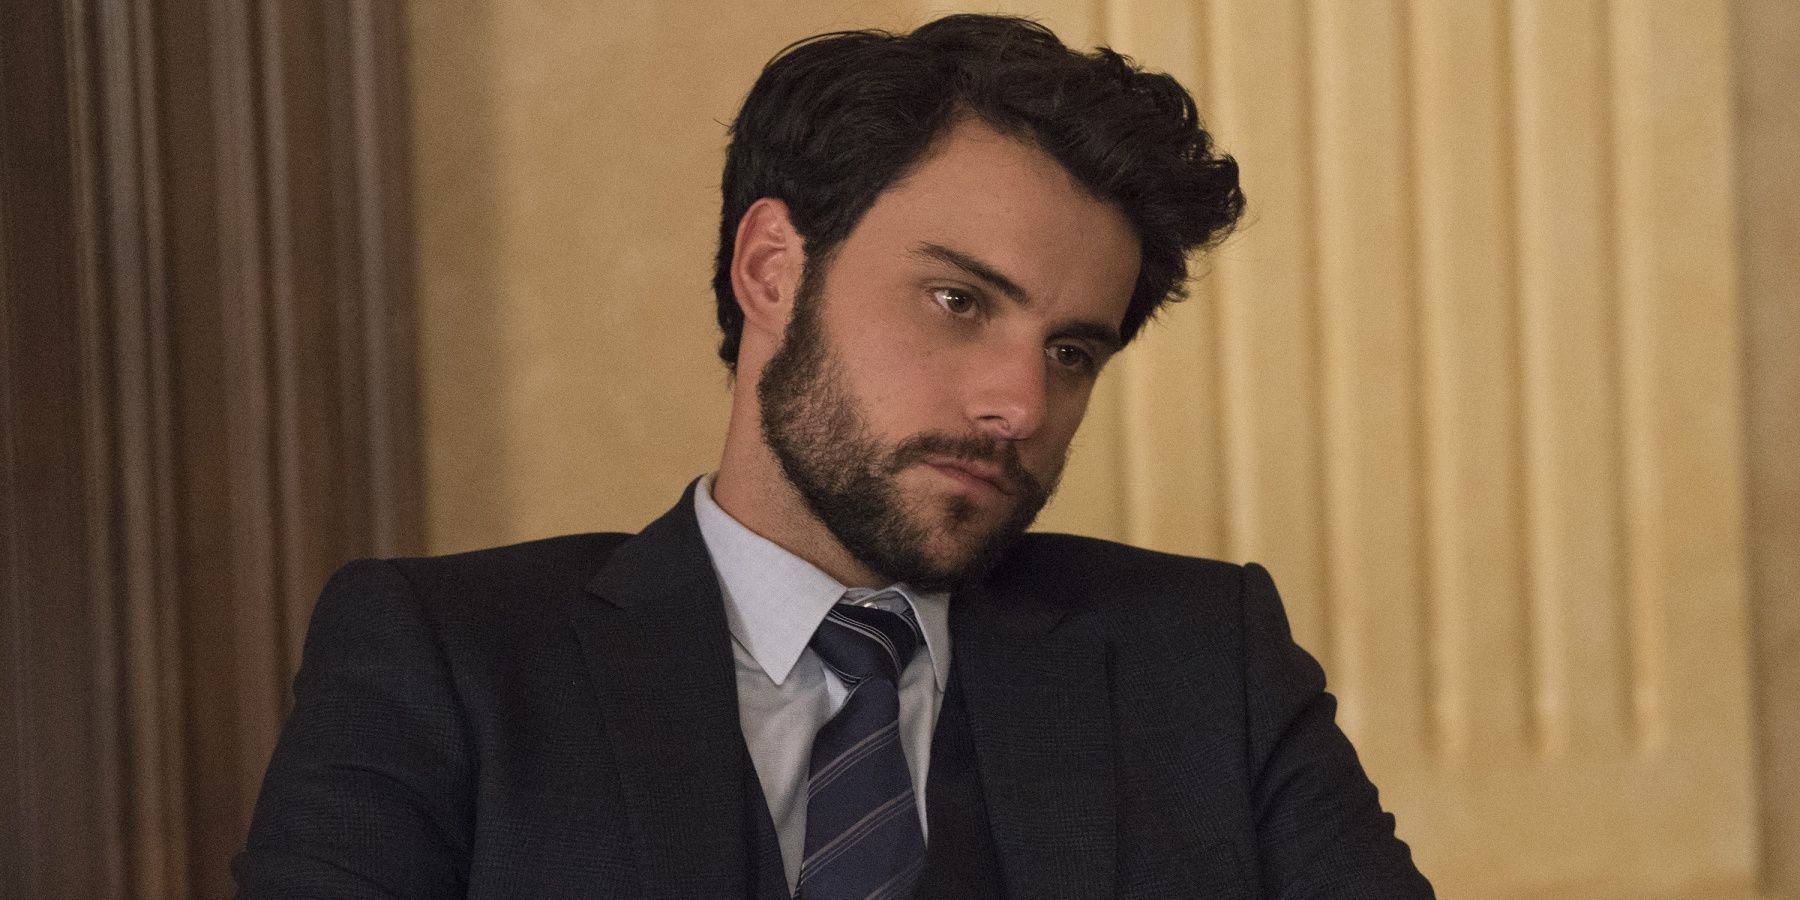 How To Get Away With Murder: 10 Hidden Details About Connor Walsh Everyone Missed